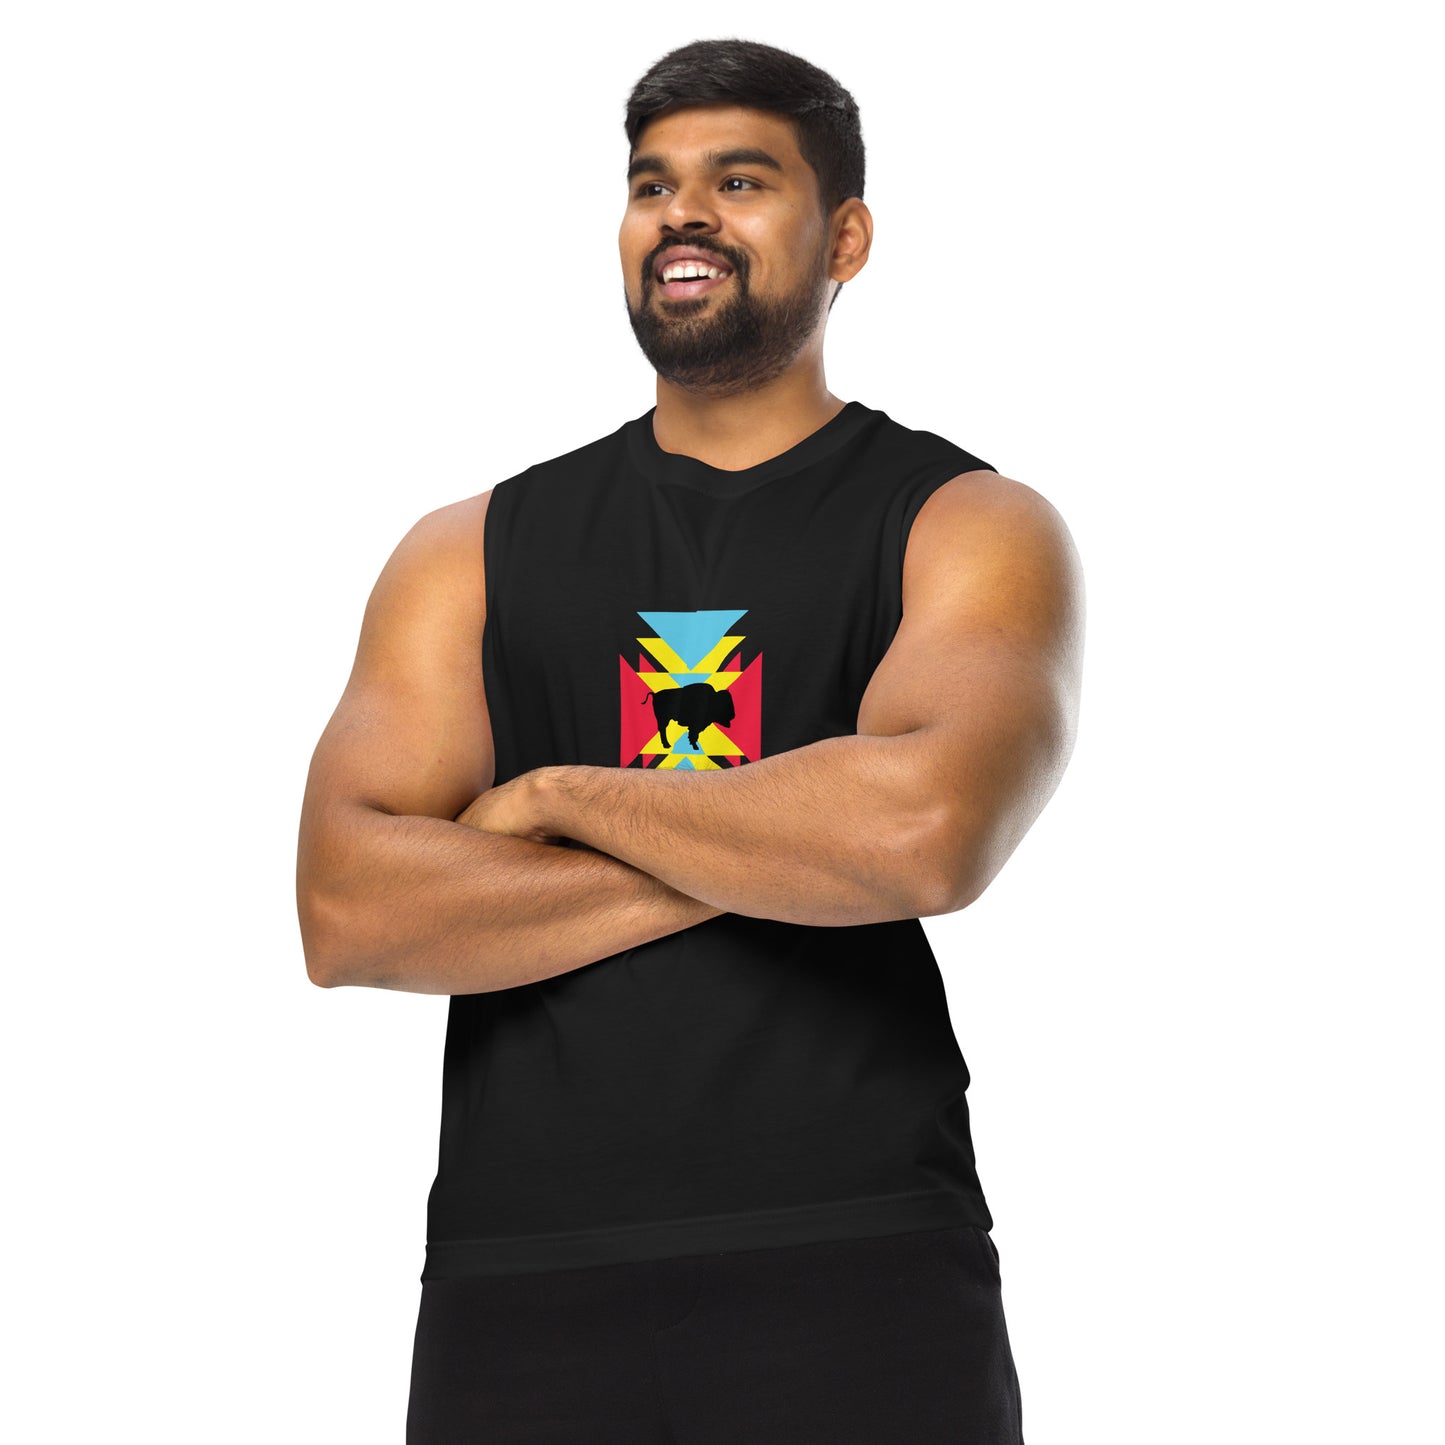 BE BRAVE Muscle Shirt